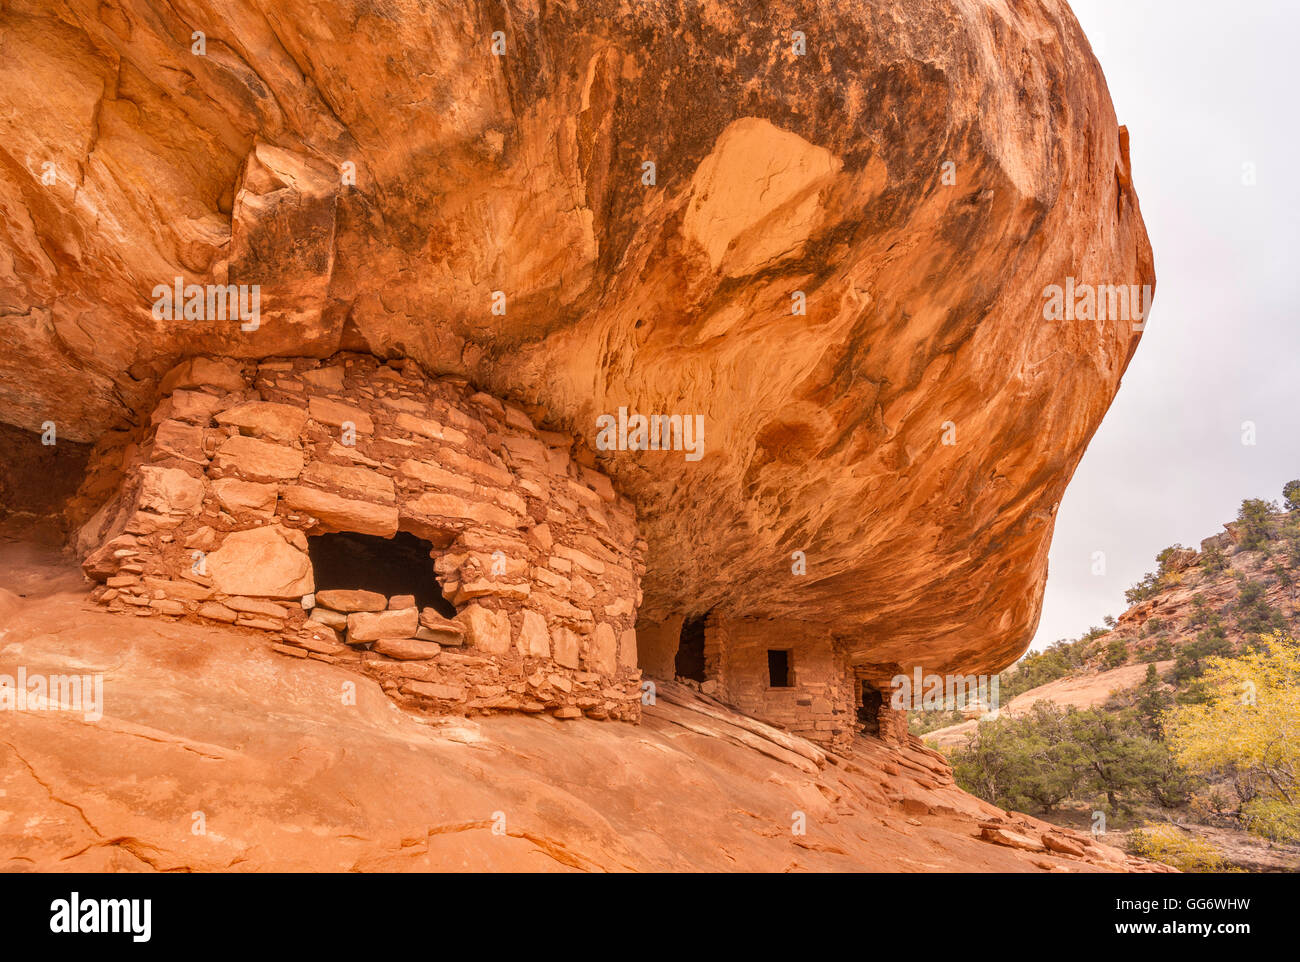 House on Fire, Puebloan cliff dwelling in Mule Canyon on Cedar Mesa, Shash Jaa Unit, Bears Ears National Monument, Utah, USA Stock Photo